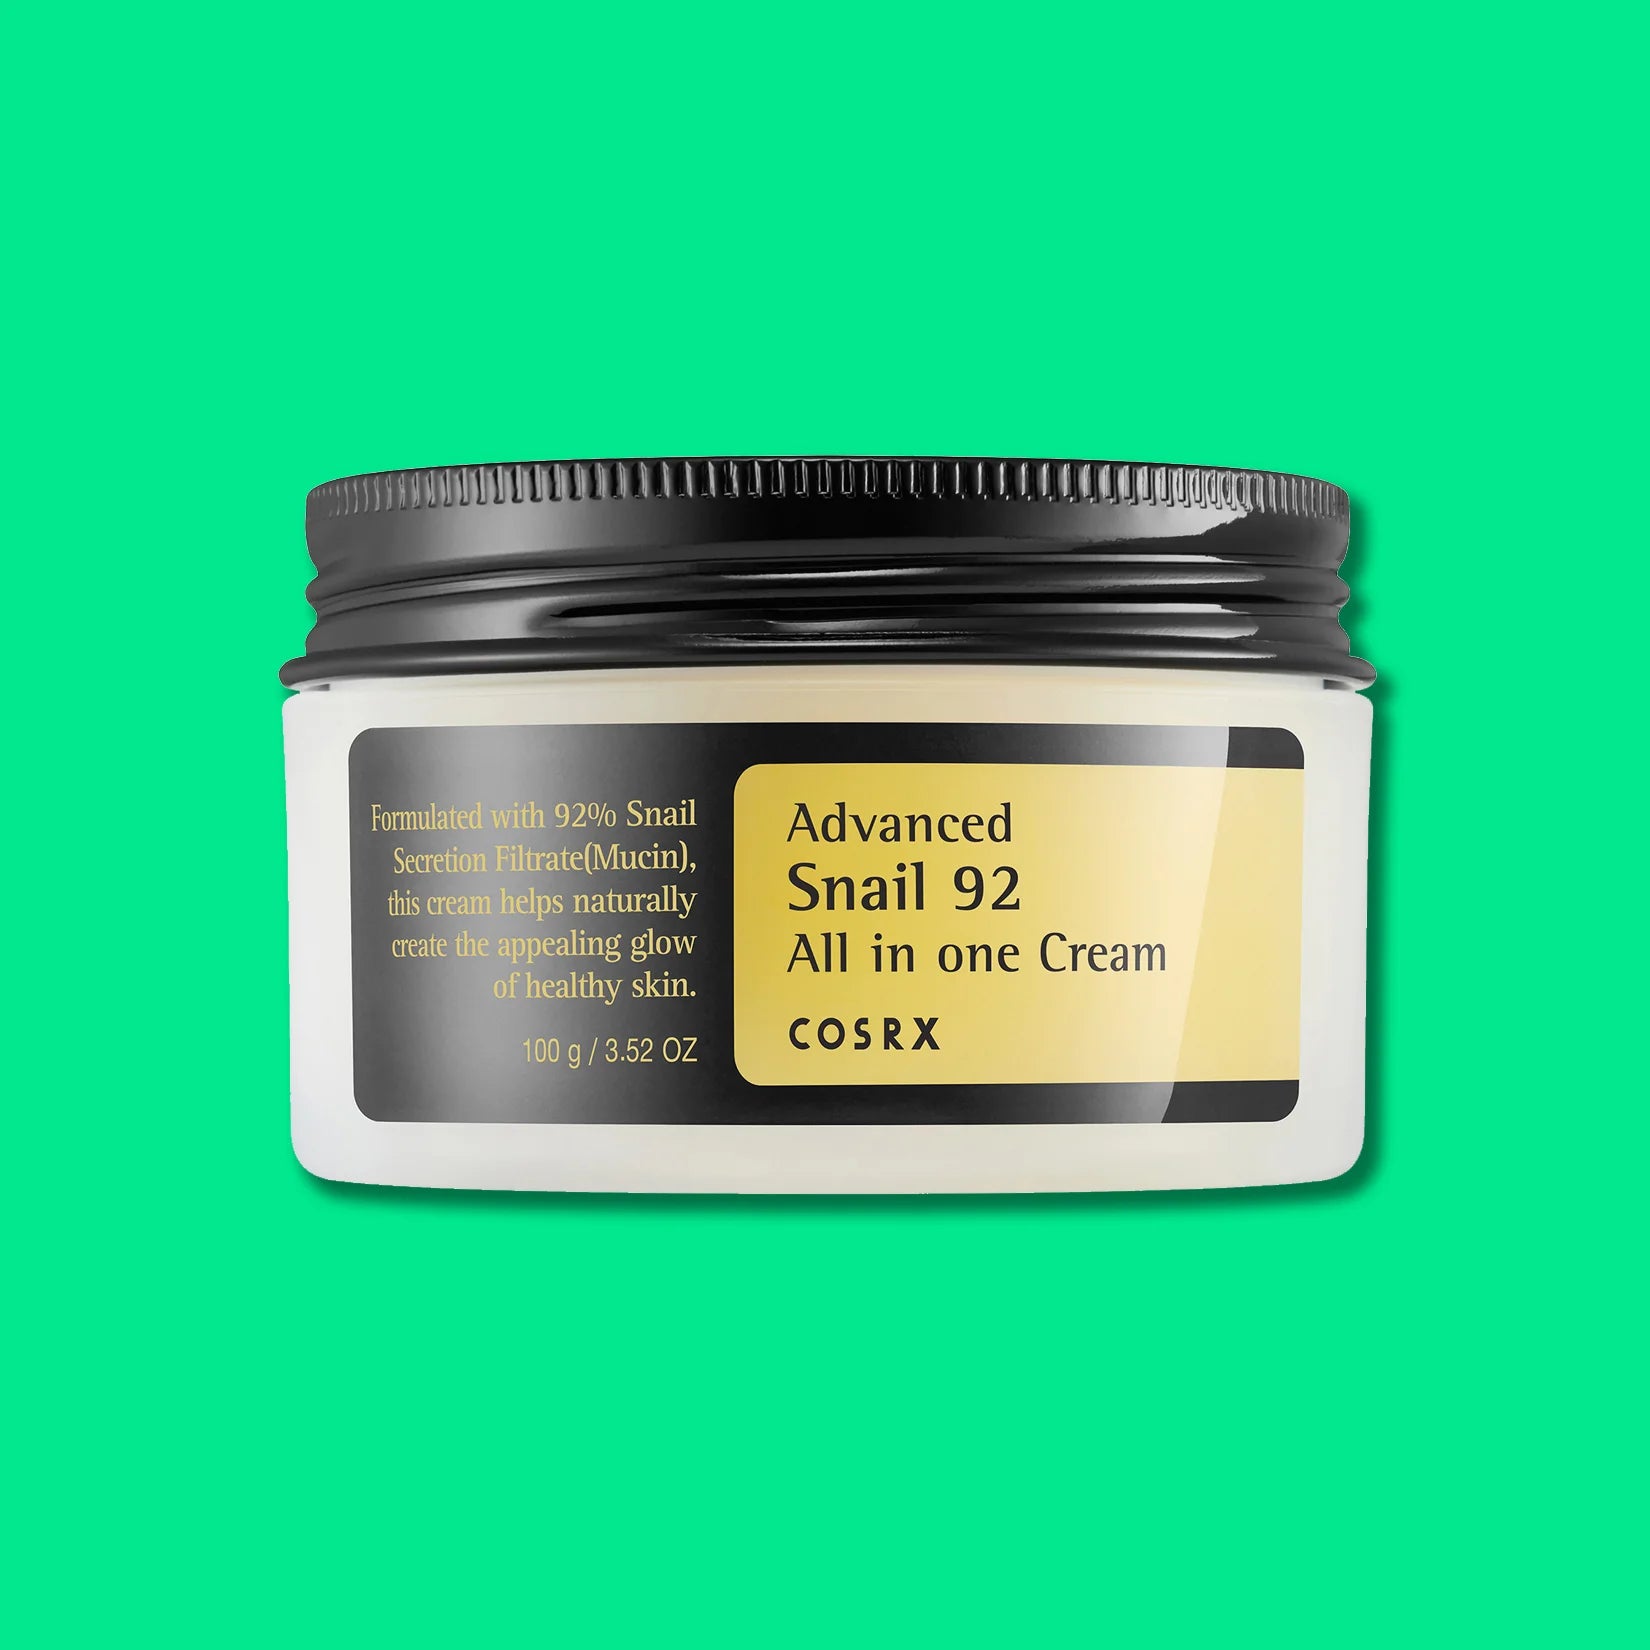 Cosrx Advanced Snail 92 All in one Cream best Korean cosmetics essence moisturizers for pimple oily skin acne wrinkles dehydrated skin  K Beauty World